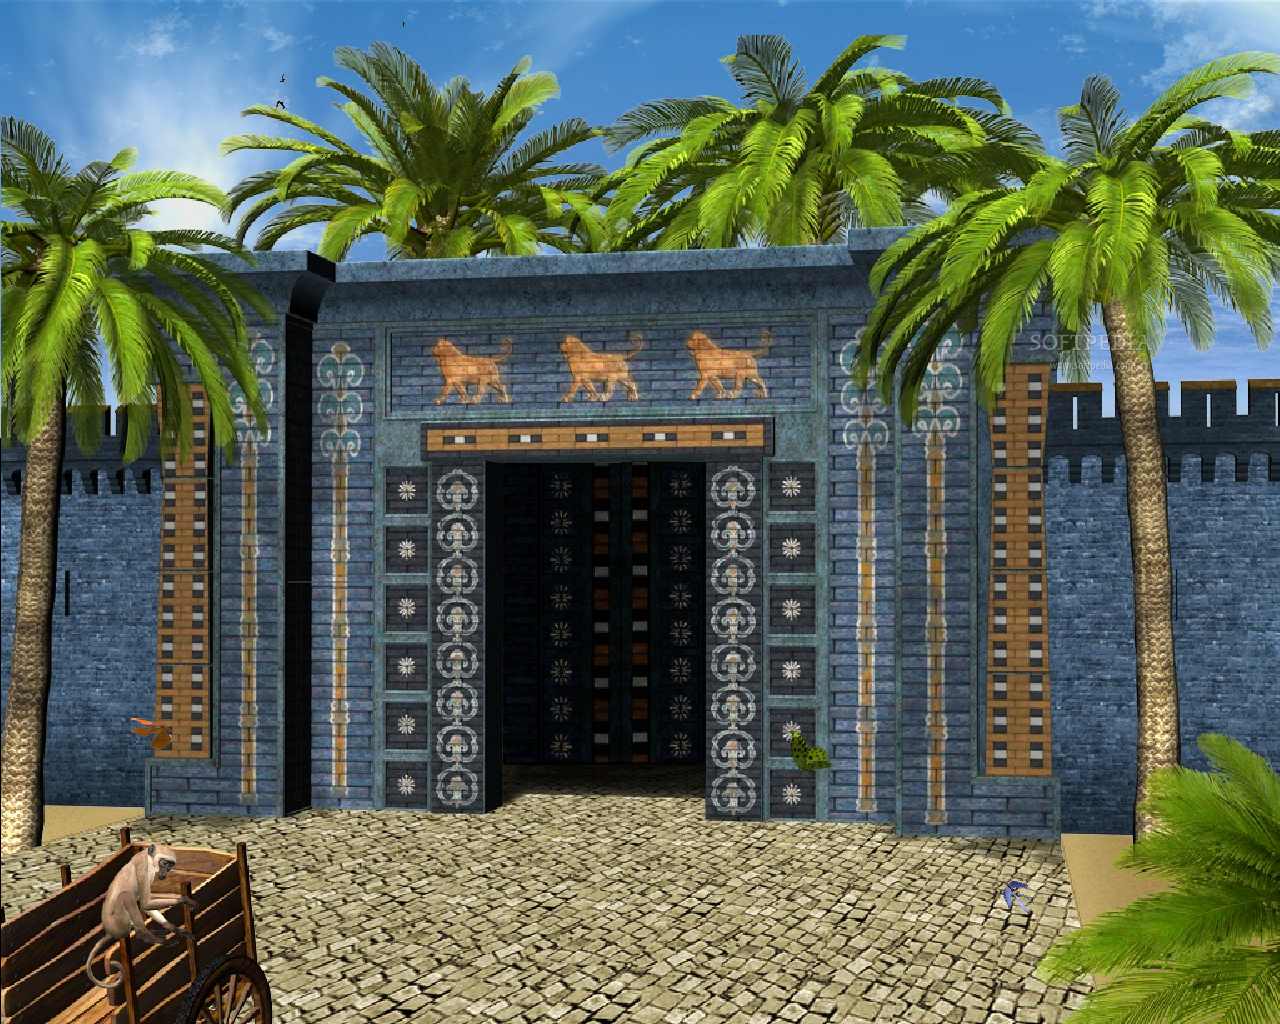 Babylon Gates   Animated Screensaver   This is the image that will be 1280x1024